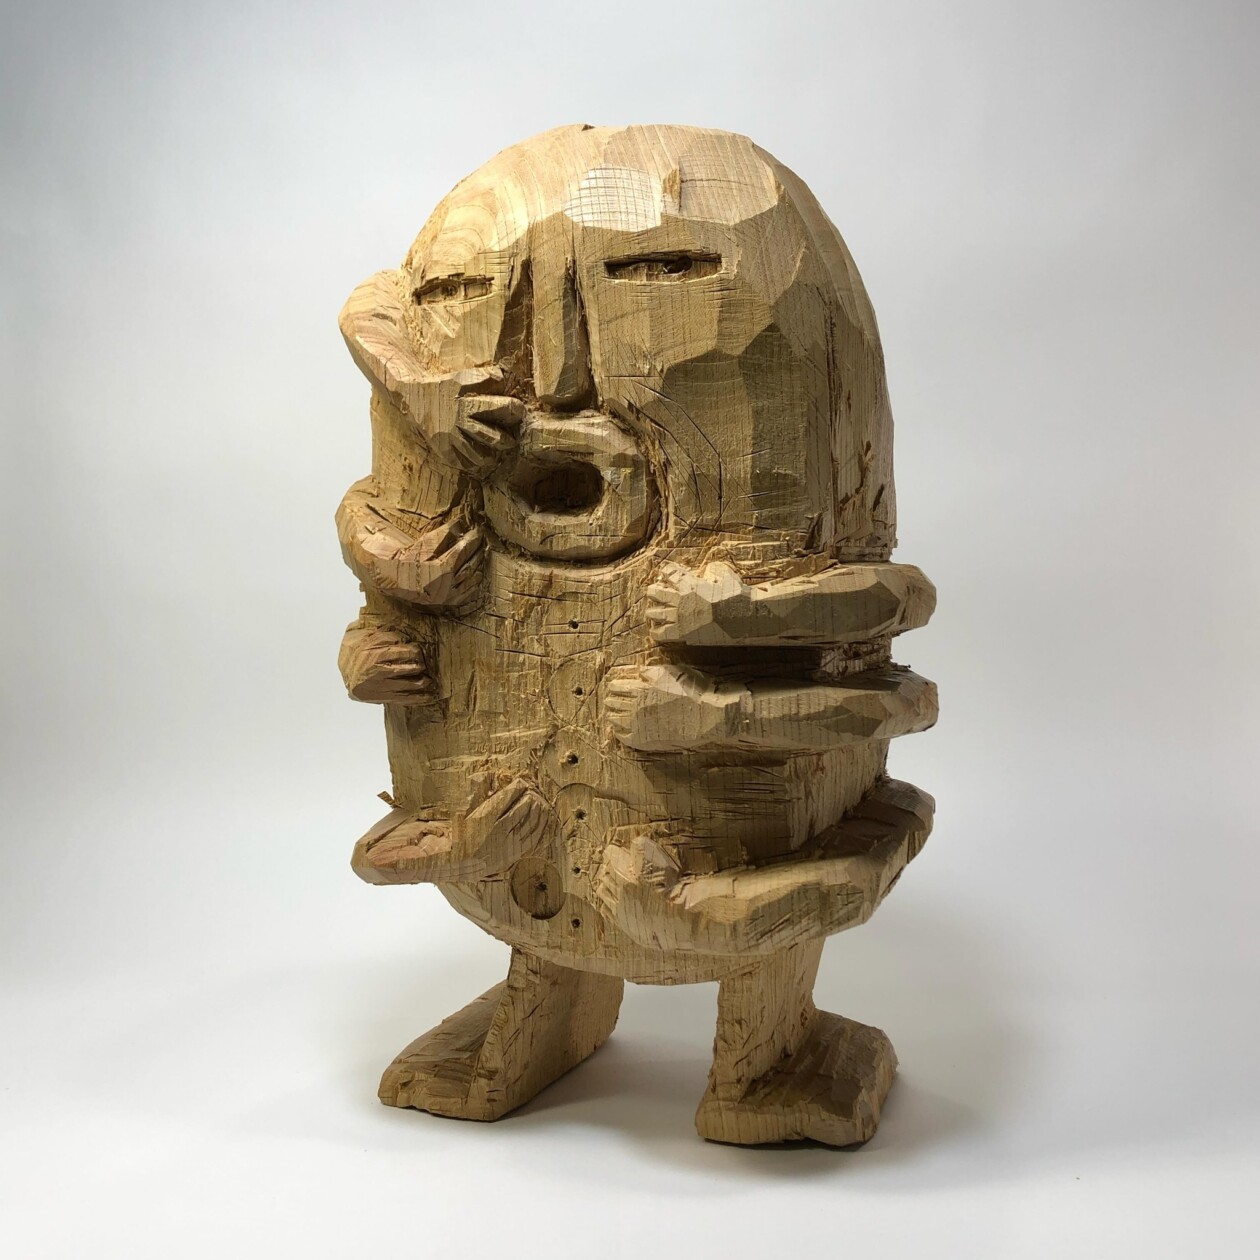 The Enchanting World Of Hirosuke Yabe's Wooden Beings (11)